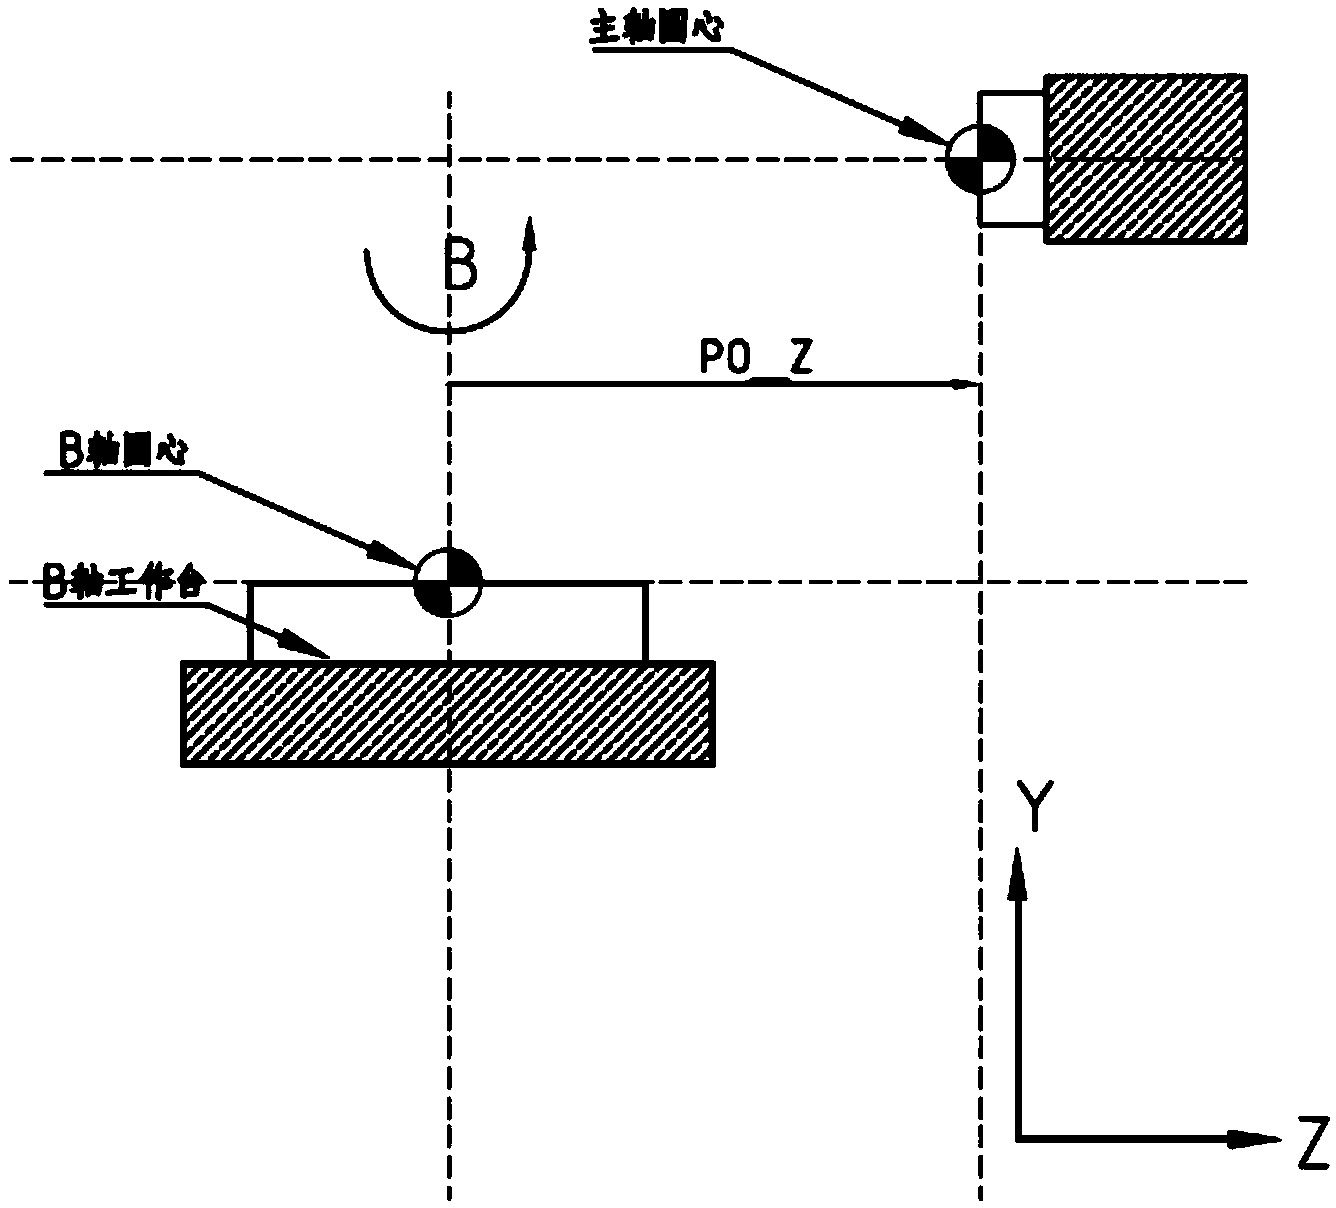 Method for achieving RTCP machining on four-axis horizontal-type machining center